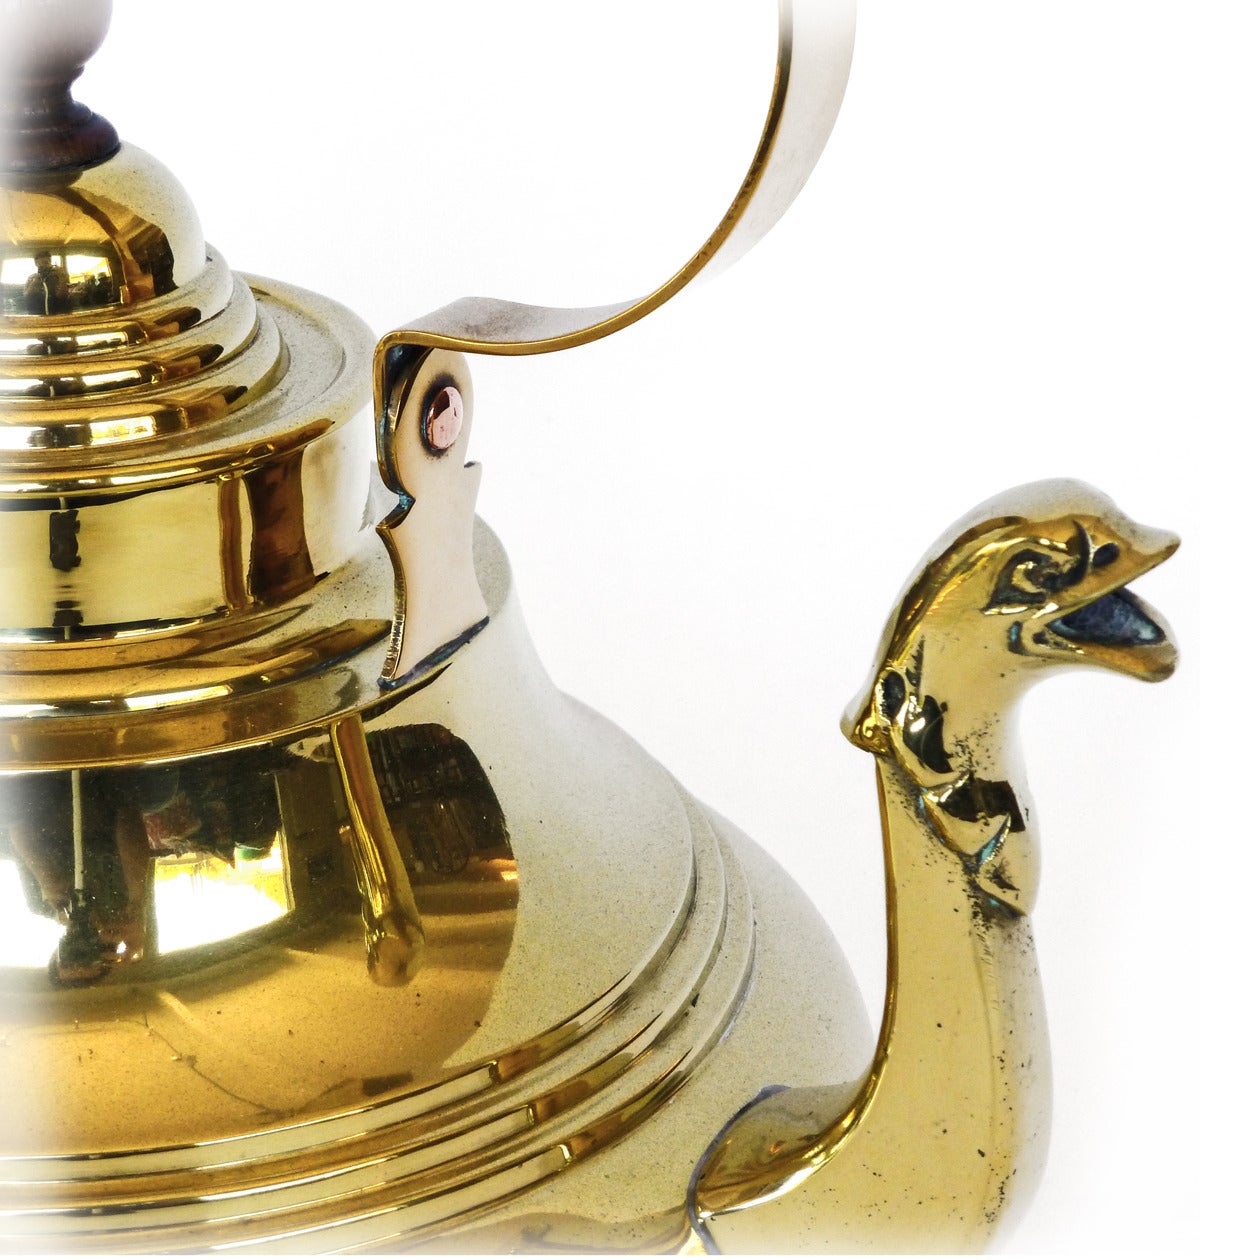 Early 18th Century Dutch Brass Tea Kettle with Swing Handle and Cast Serpent Spout, circa 1725